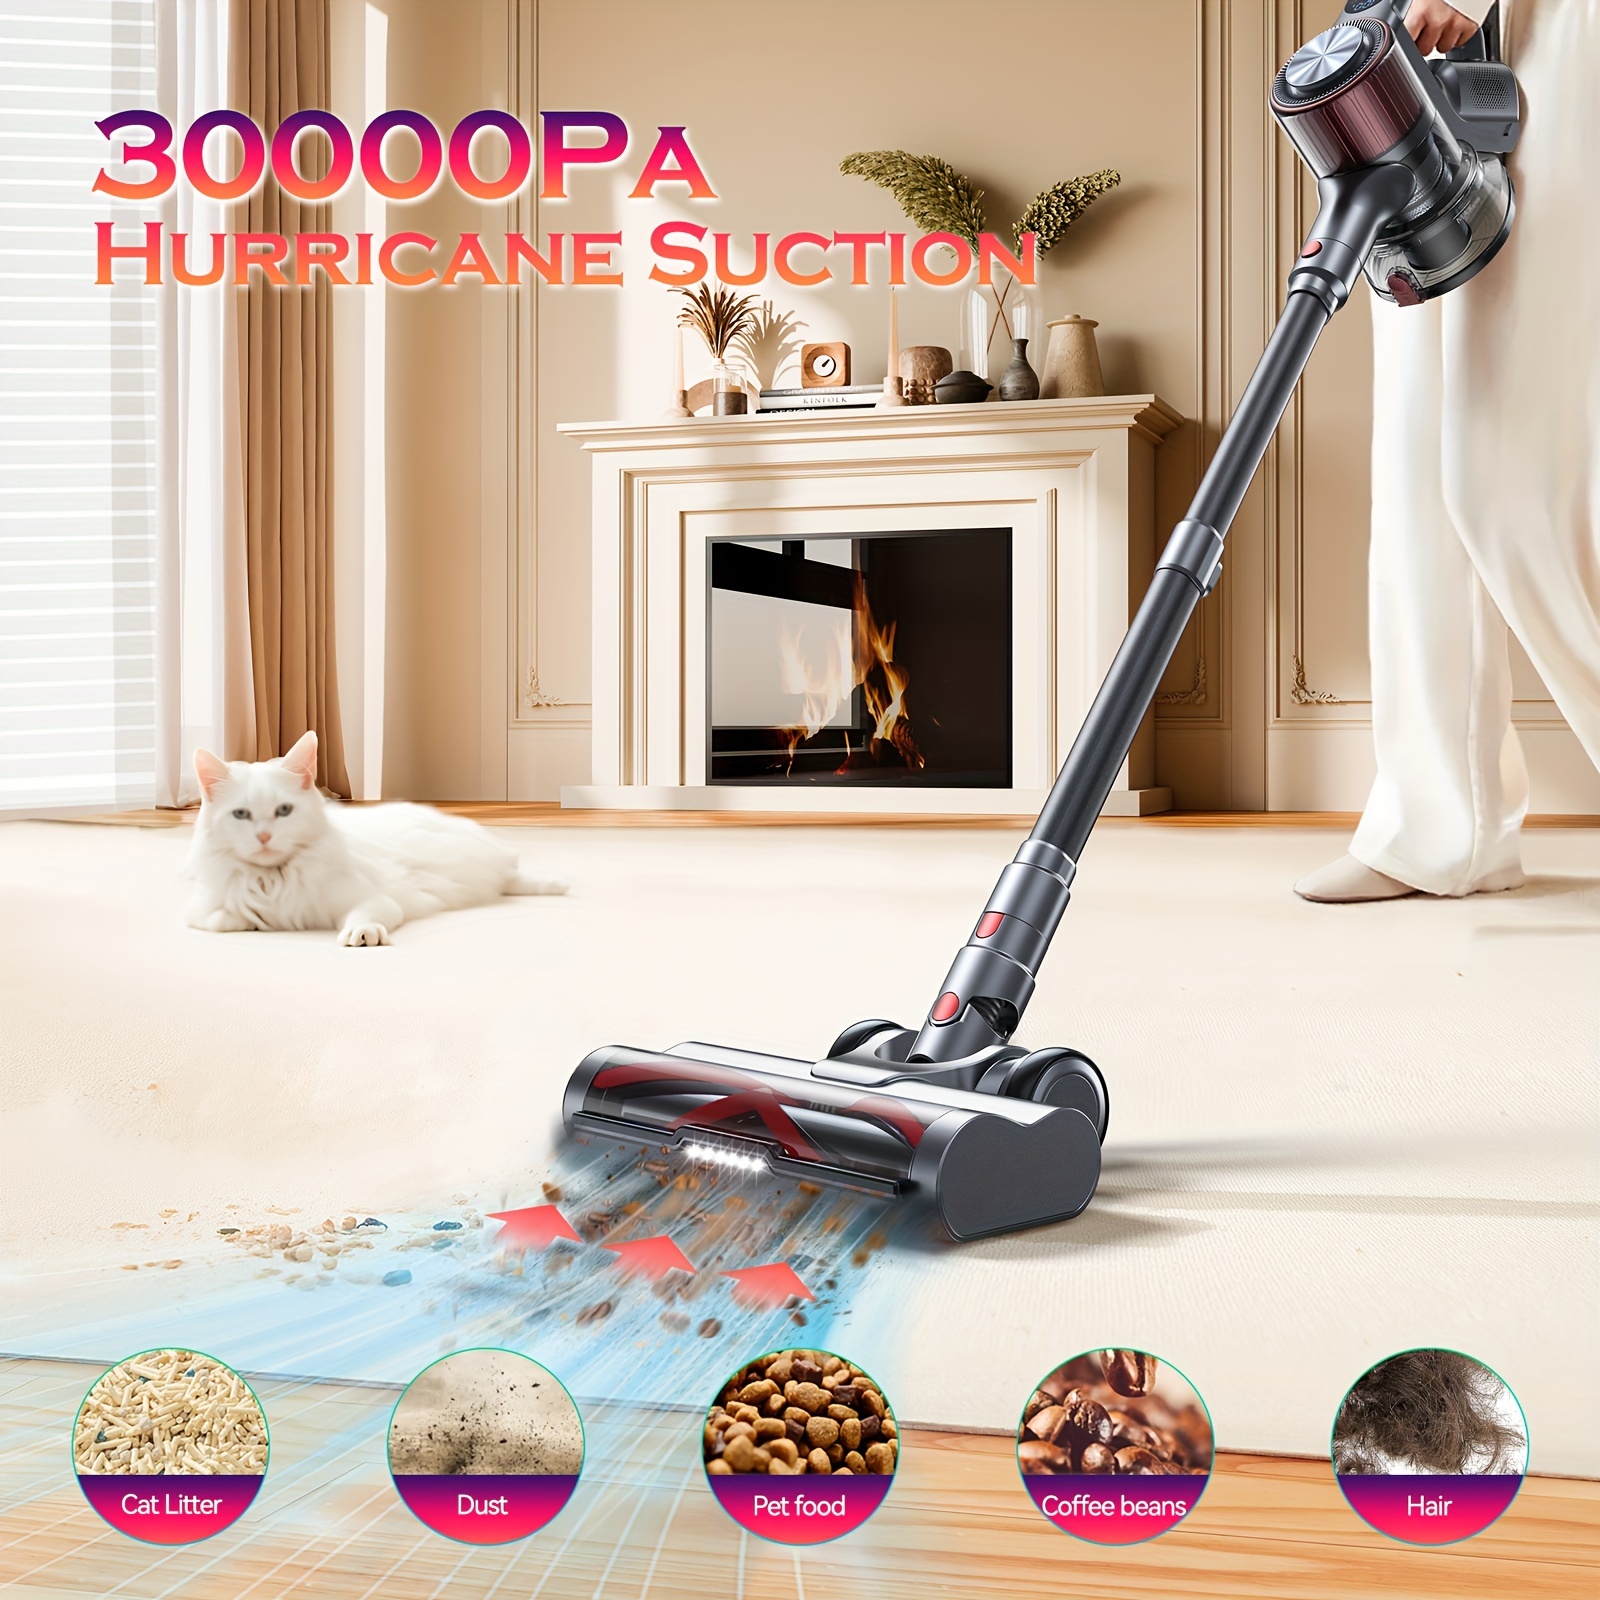 

400w/35kpa Cordless Vacuum Cleaner, Stick Vacuum With Smart Display, Max 45 Min Runtime, 8-in-1 Wall-mounted Charging Vacuum, 5-layer Filtration For Pet Hair/carpet/hard Floor